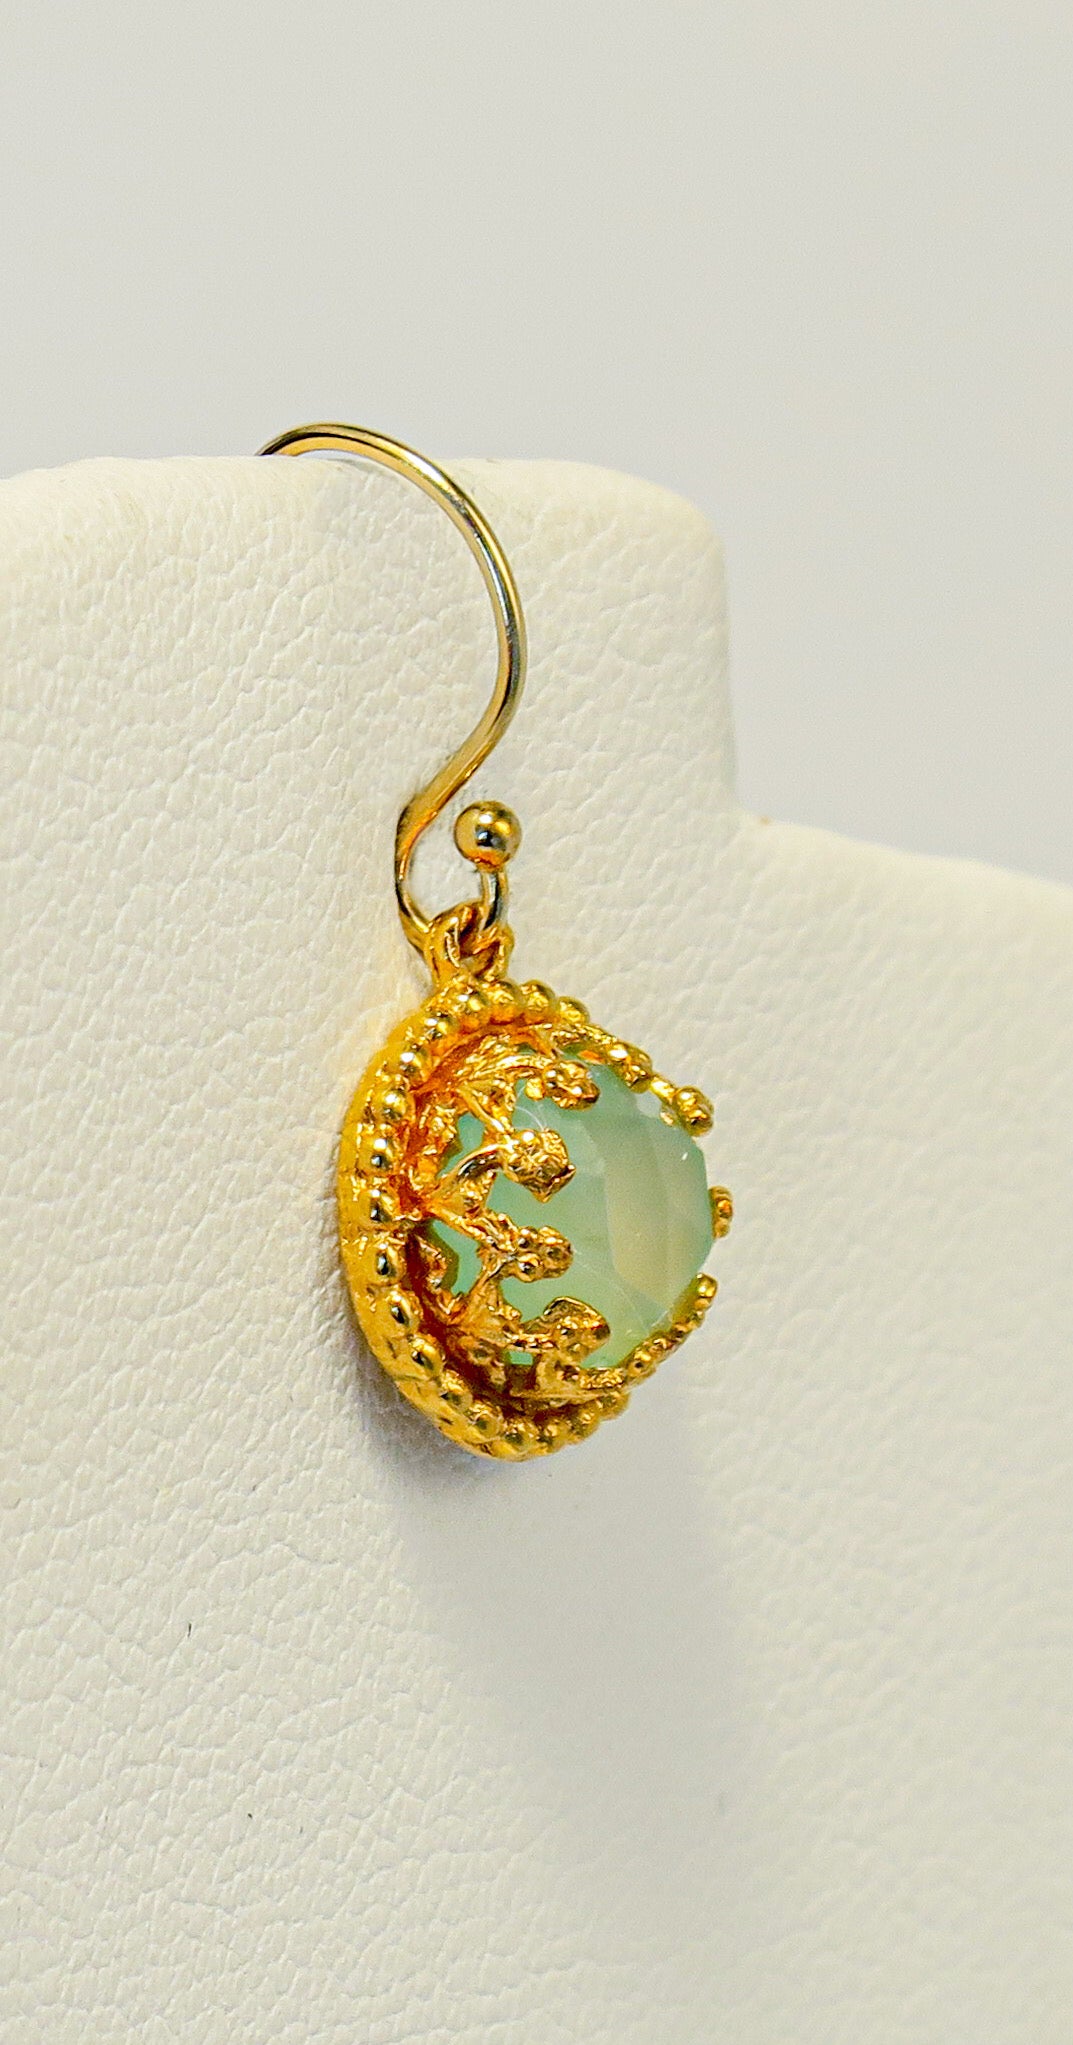 18K Gold Vermeil and Aqua Chalcedony Earrings | by Vanessa Mellet